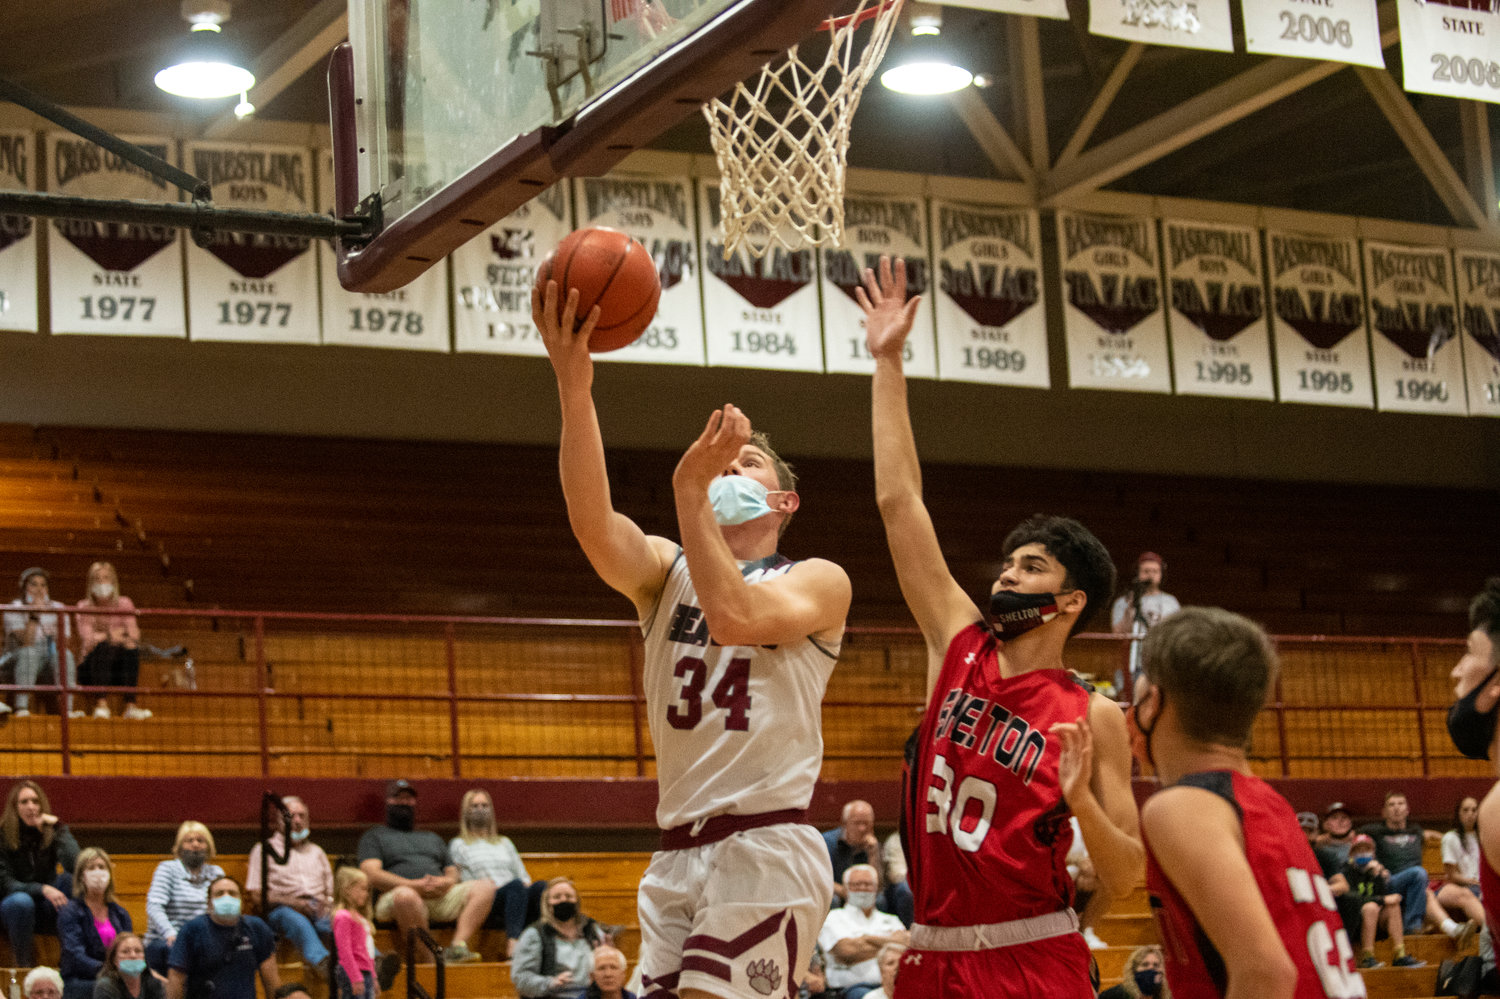 W.F. West senior Whalen Deskins (34) drives for a quick bucket against Shelton on Tuesday.